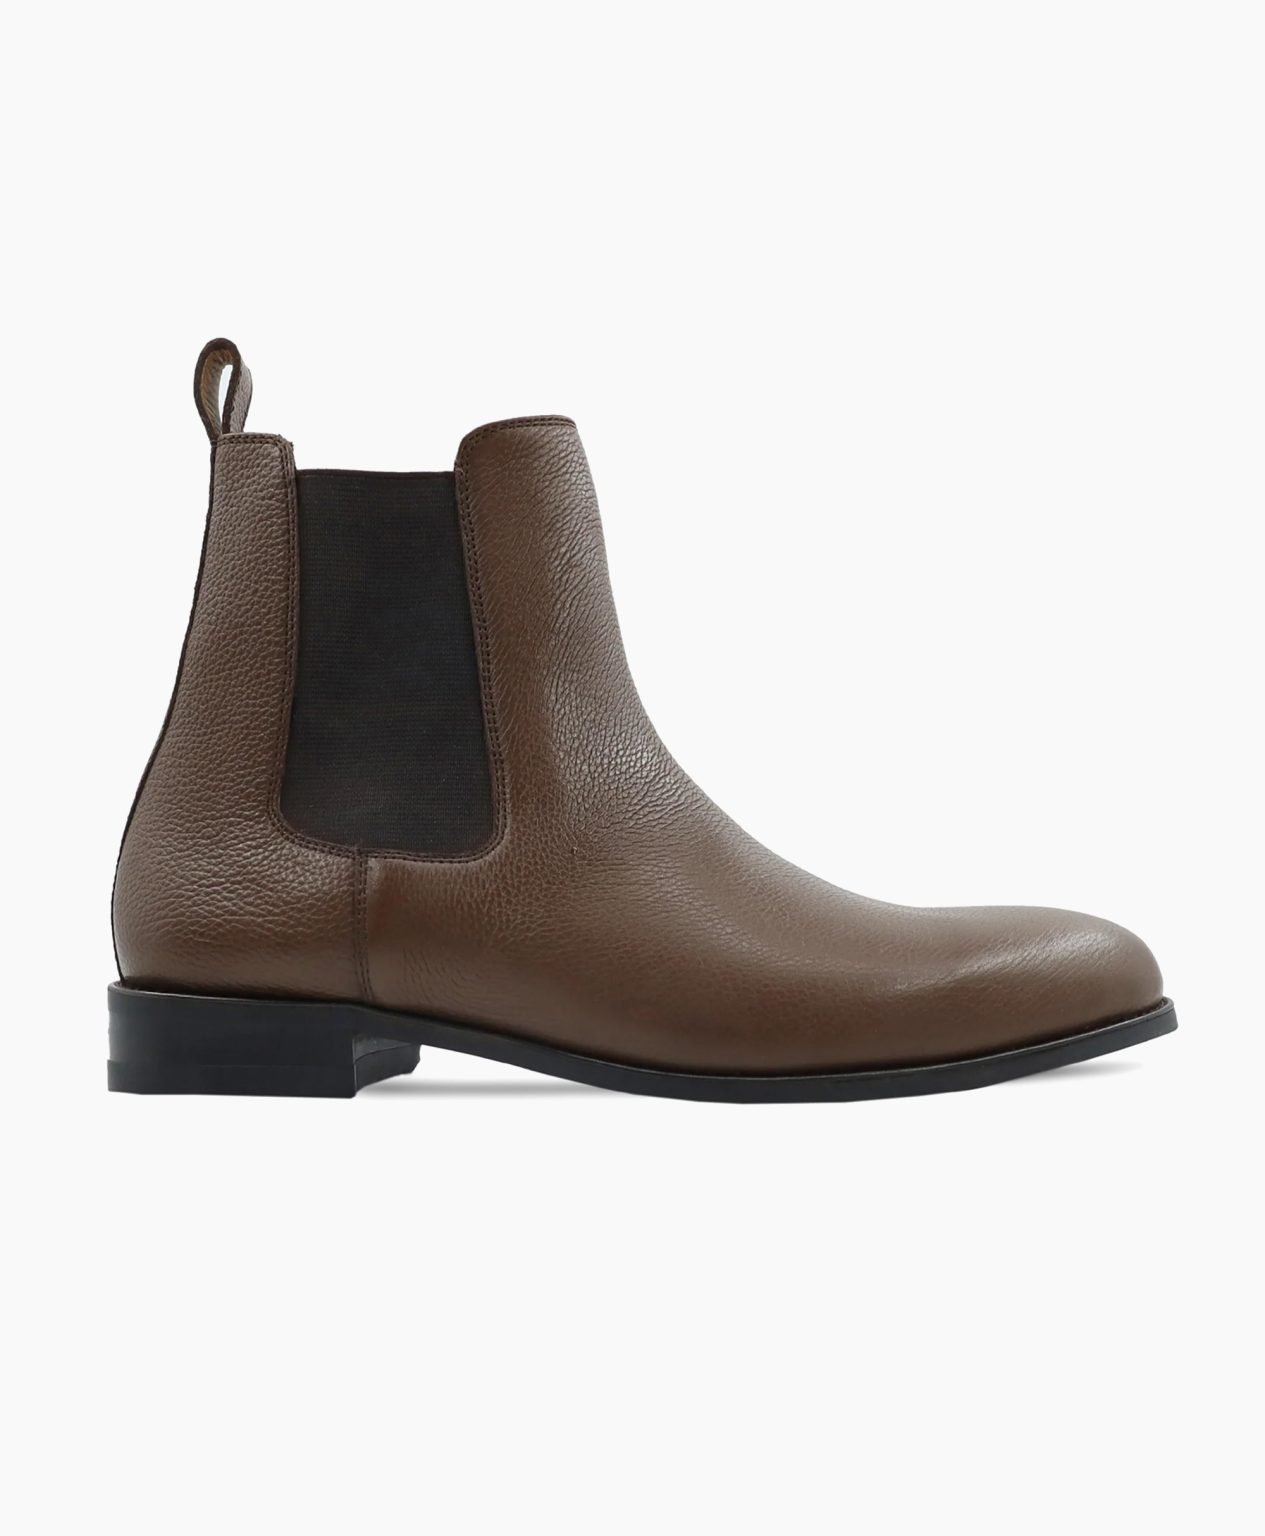 carlisle-chelsea-brown-leather-boot-image201